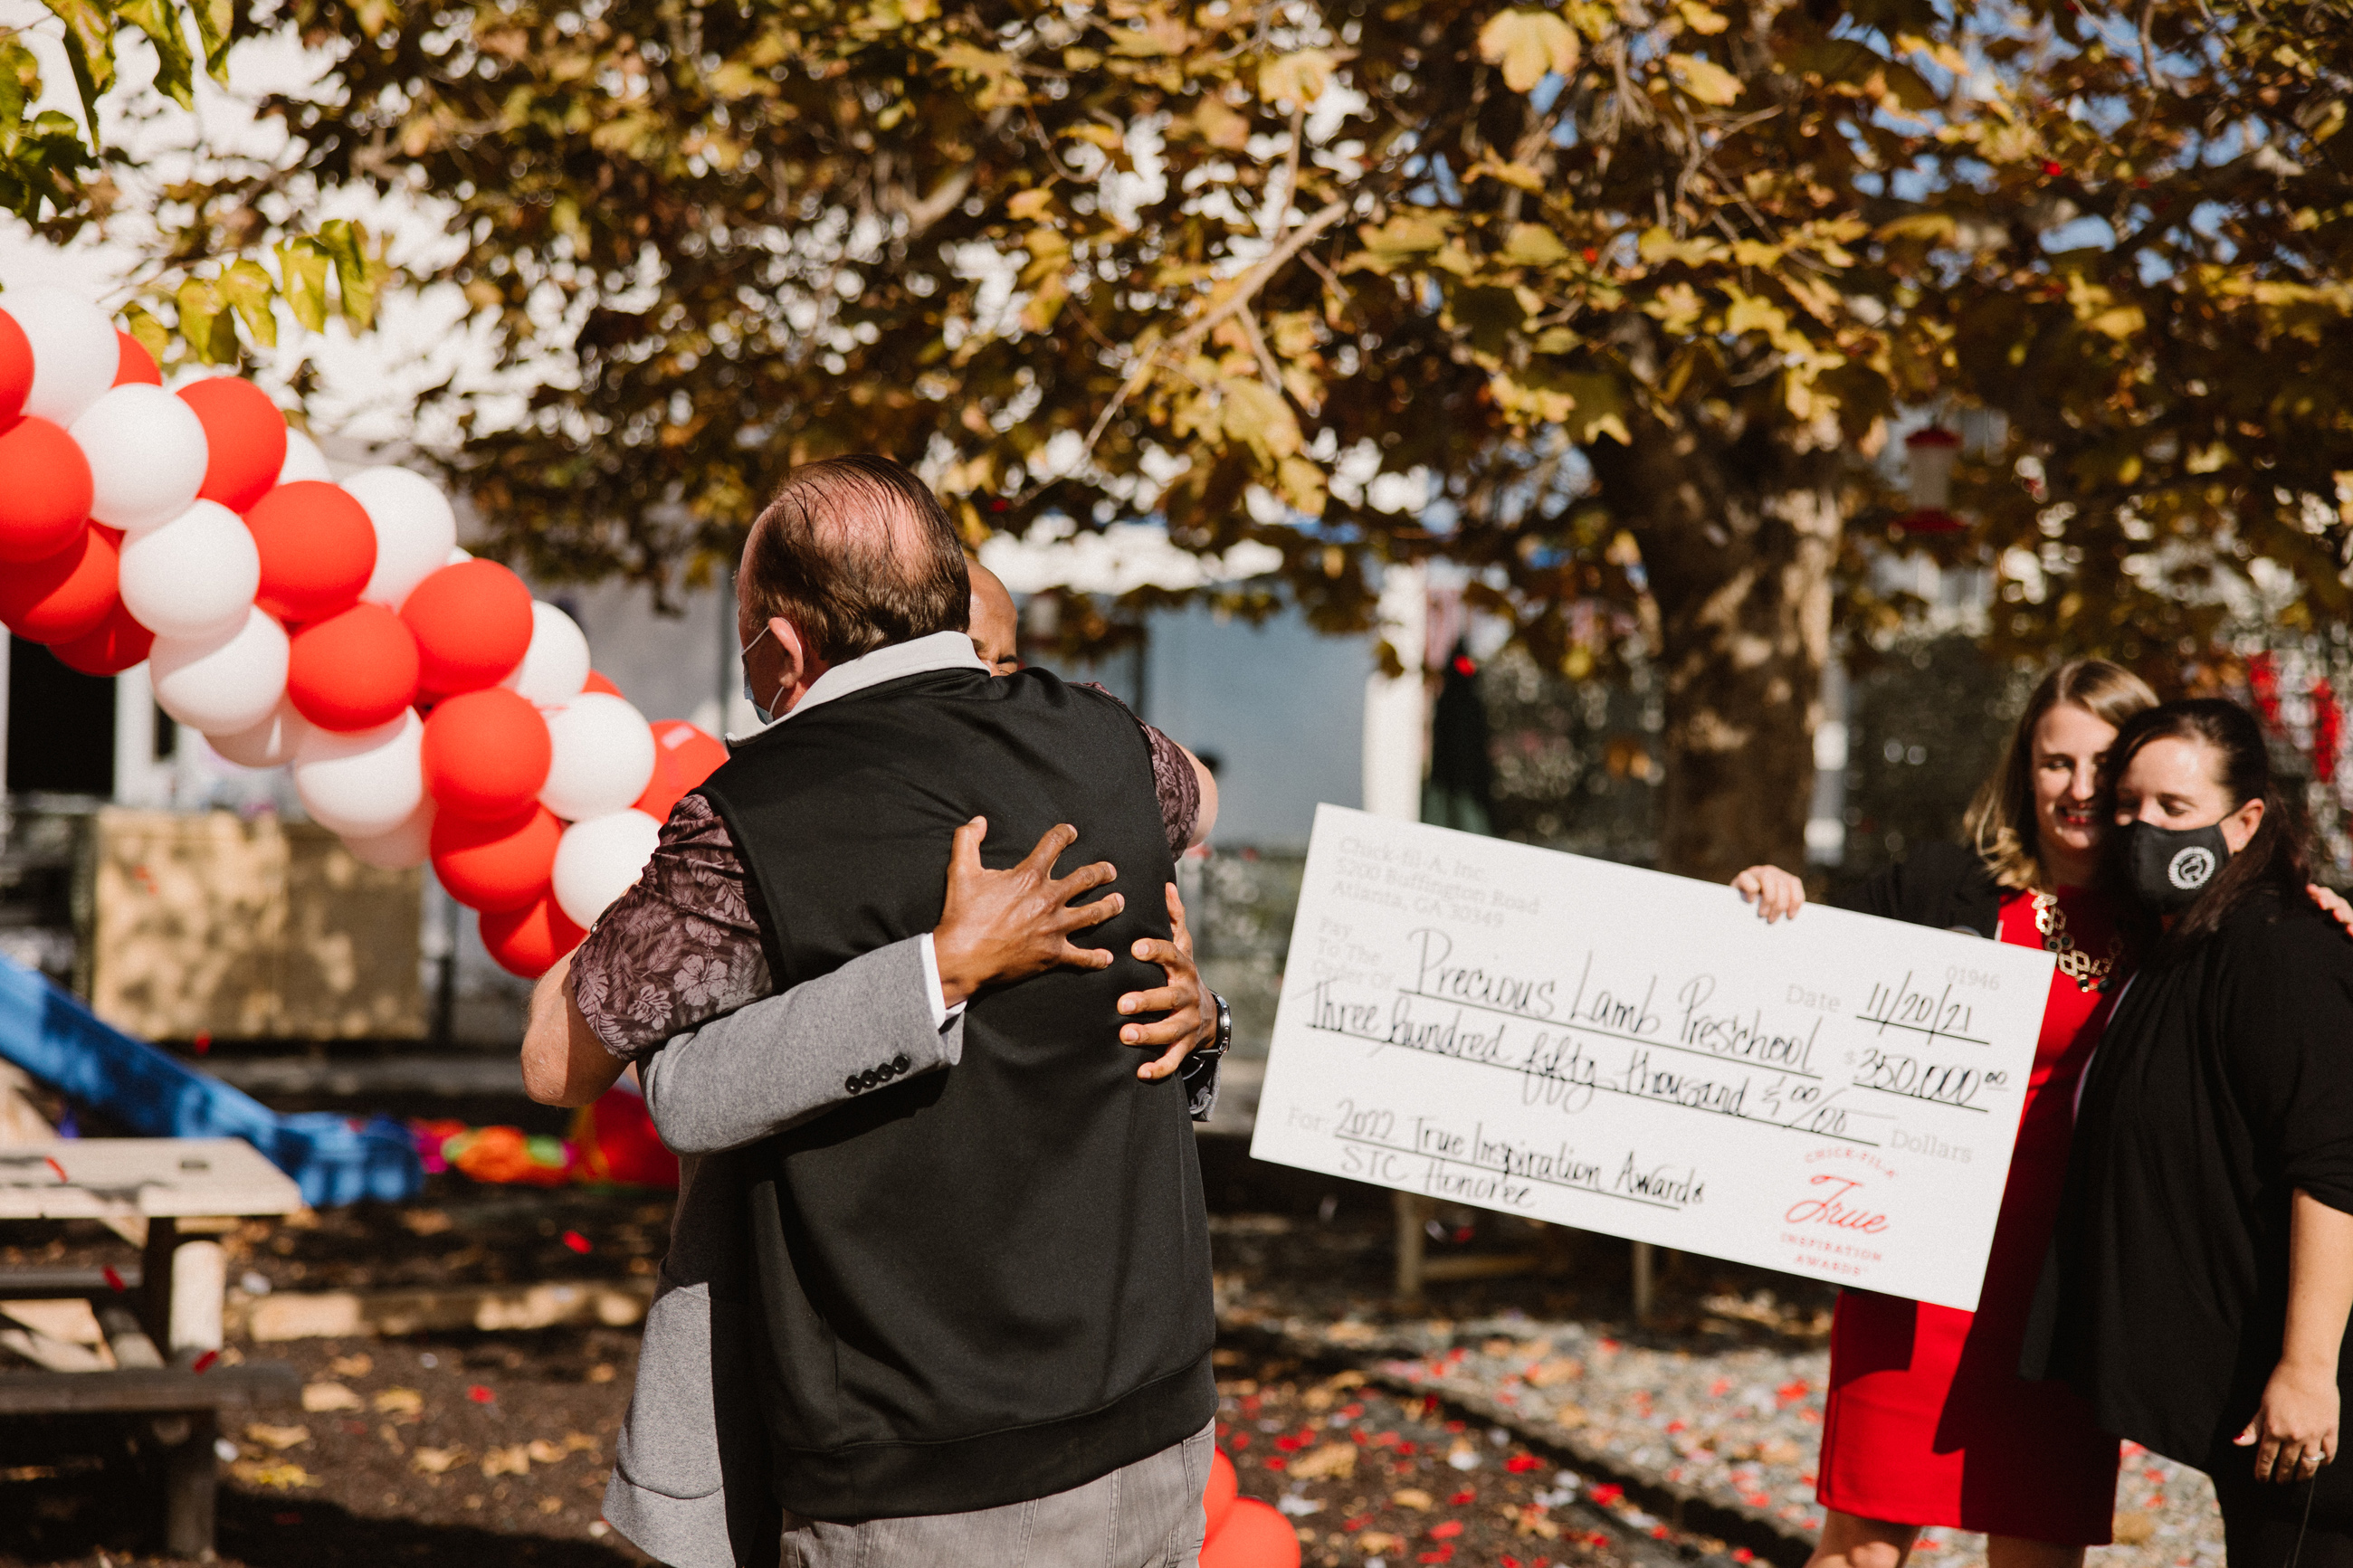 Chick-fil-A gives $5 million in True Inspiration Awards grants to 34 organizations across the country making an impact in their local communities.